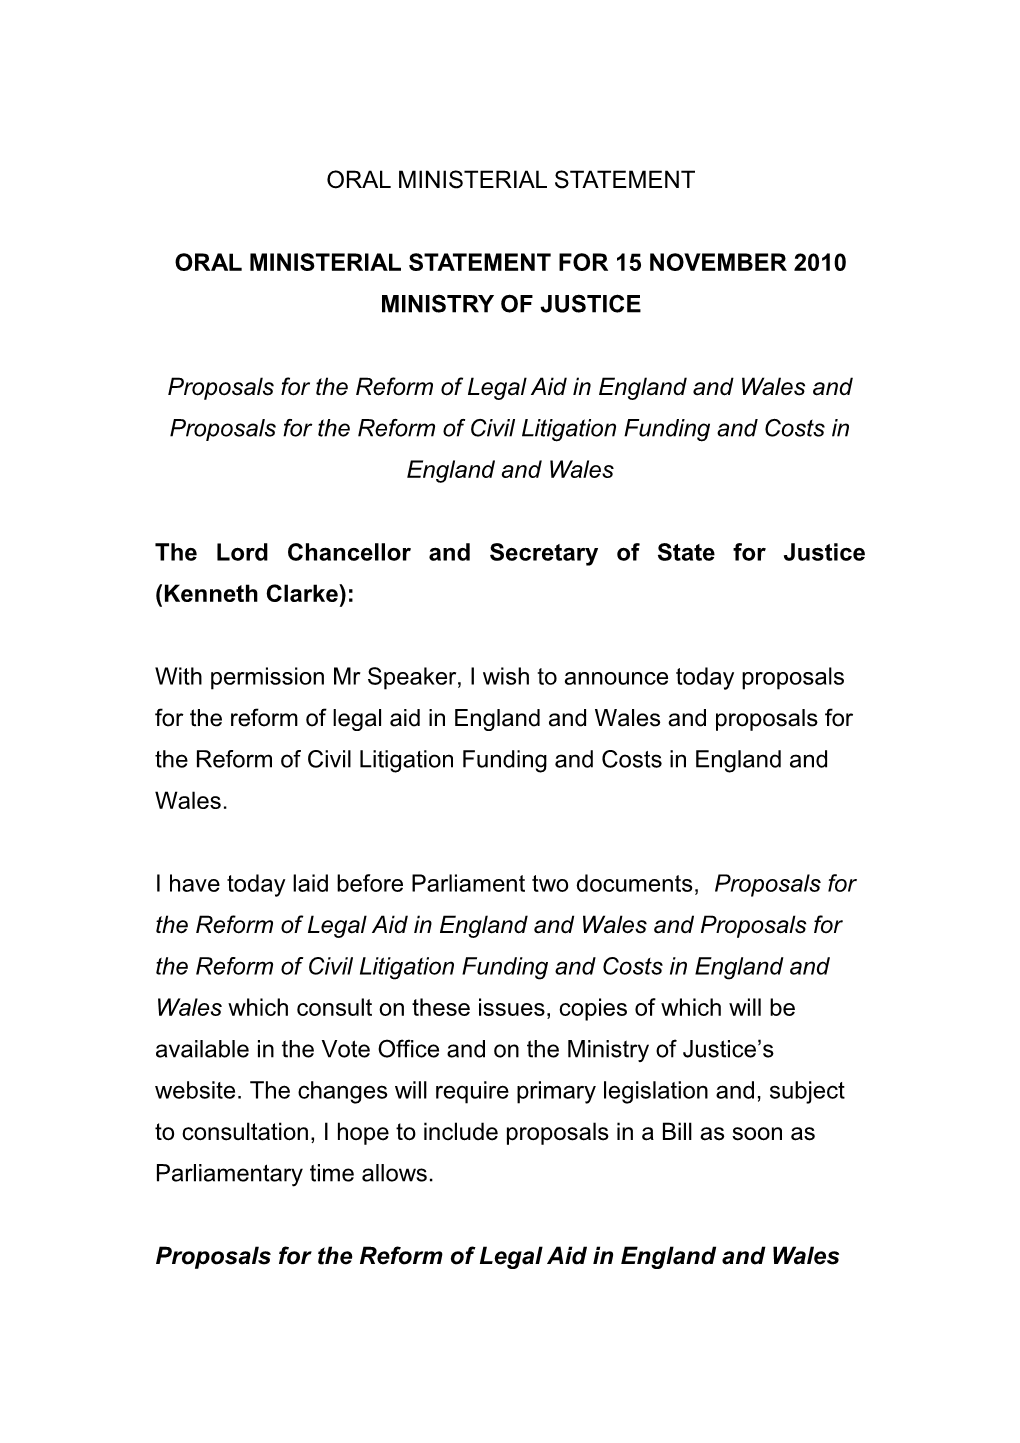 Draft Oral Ministerial Statement